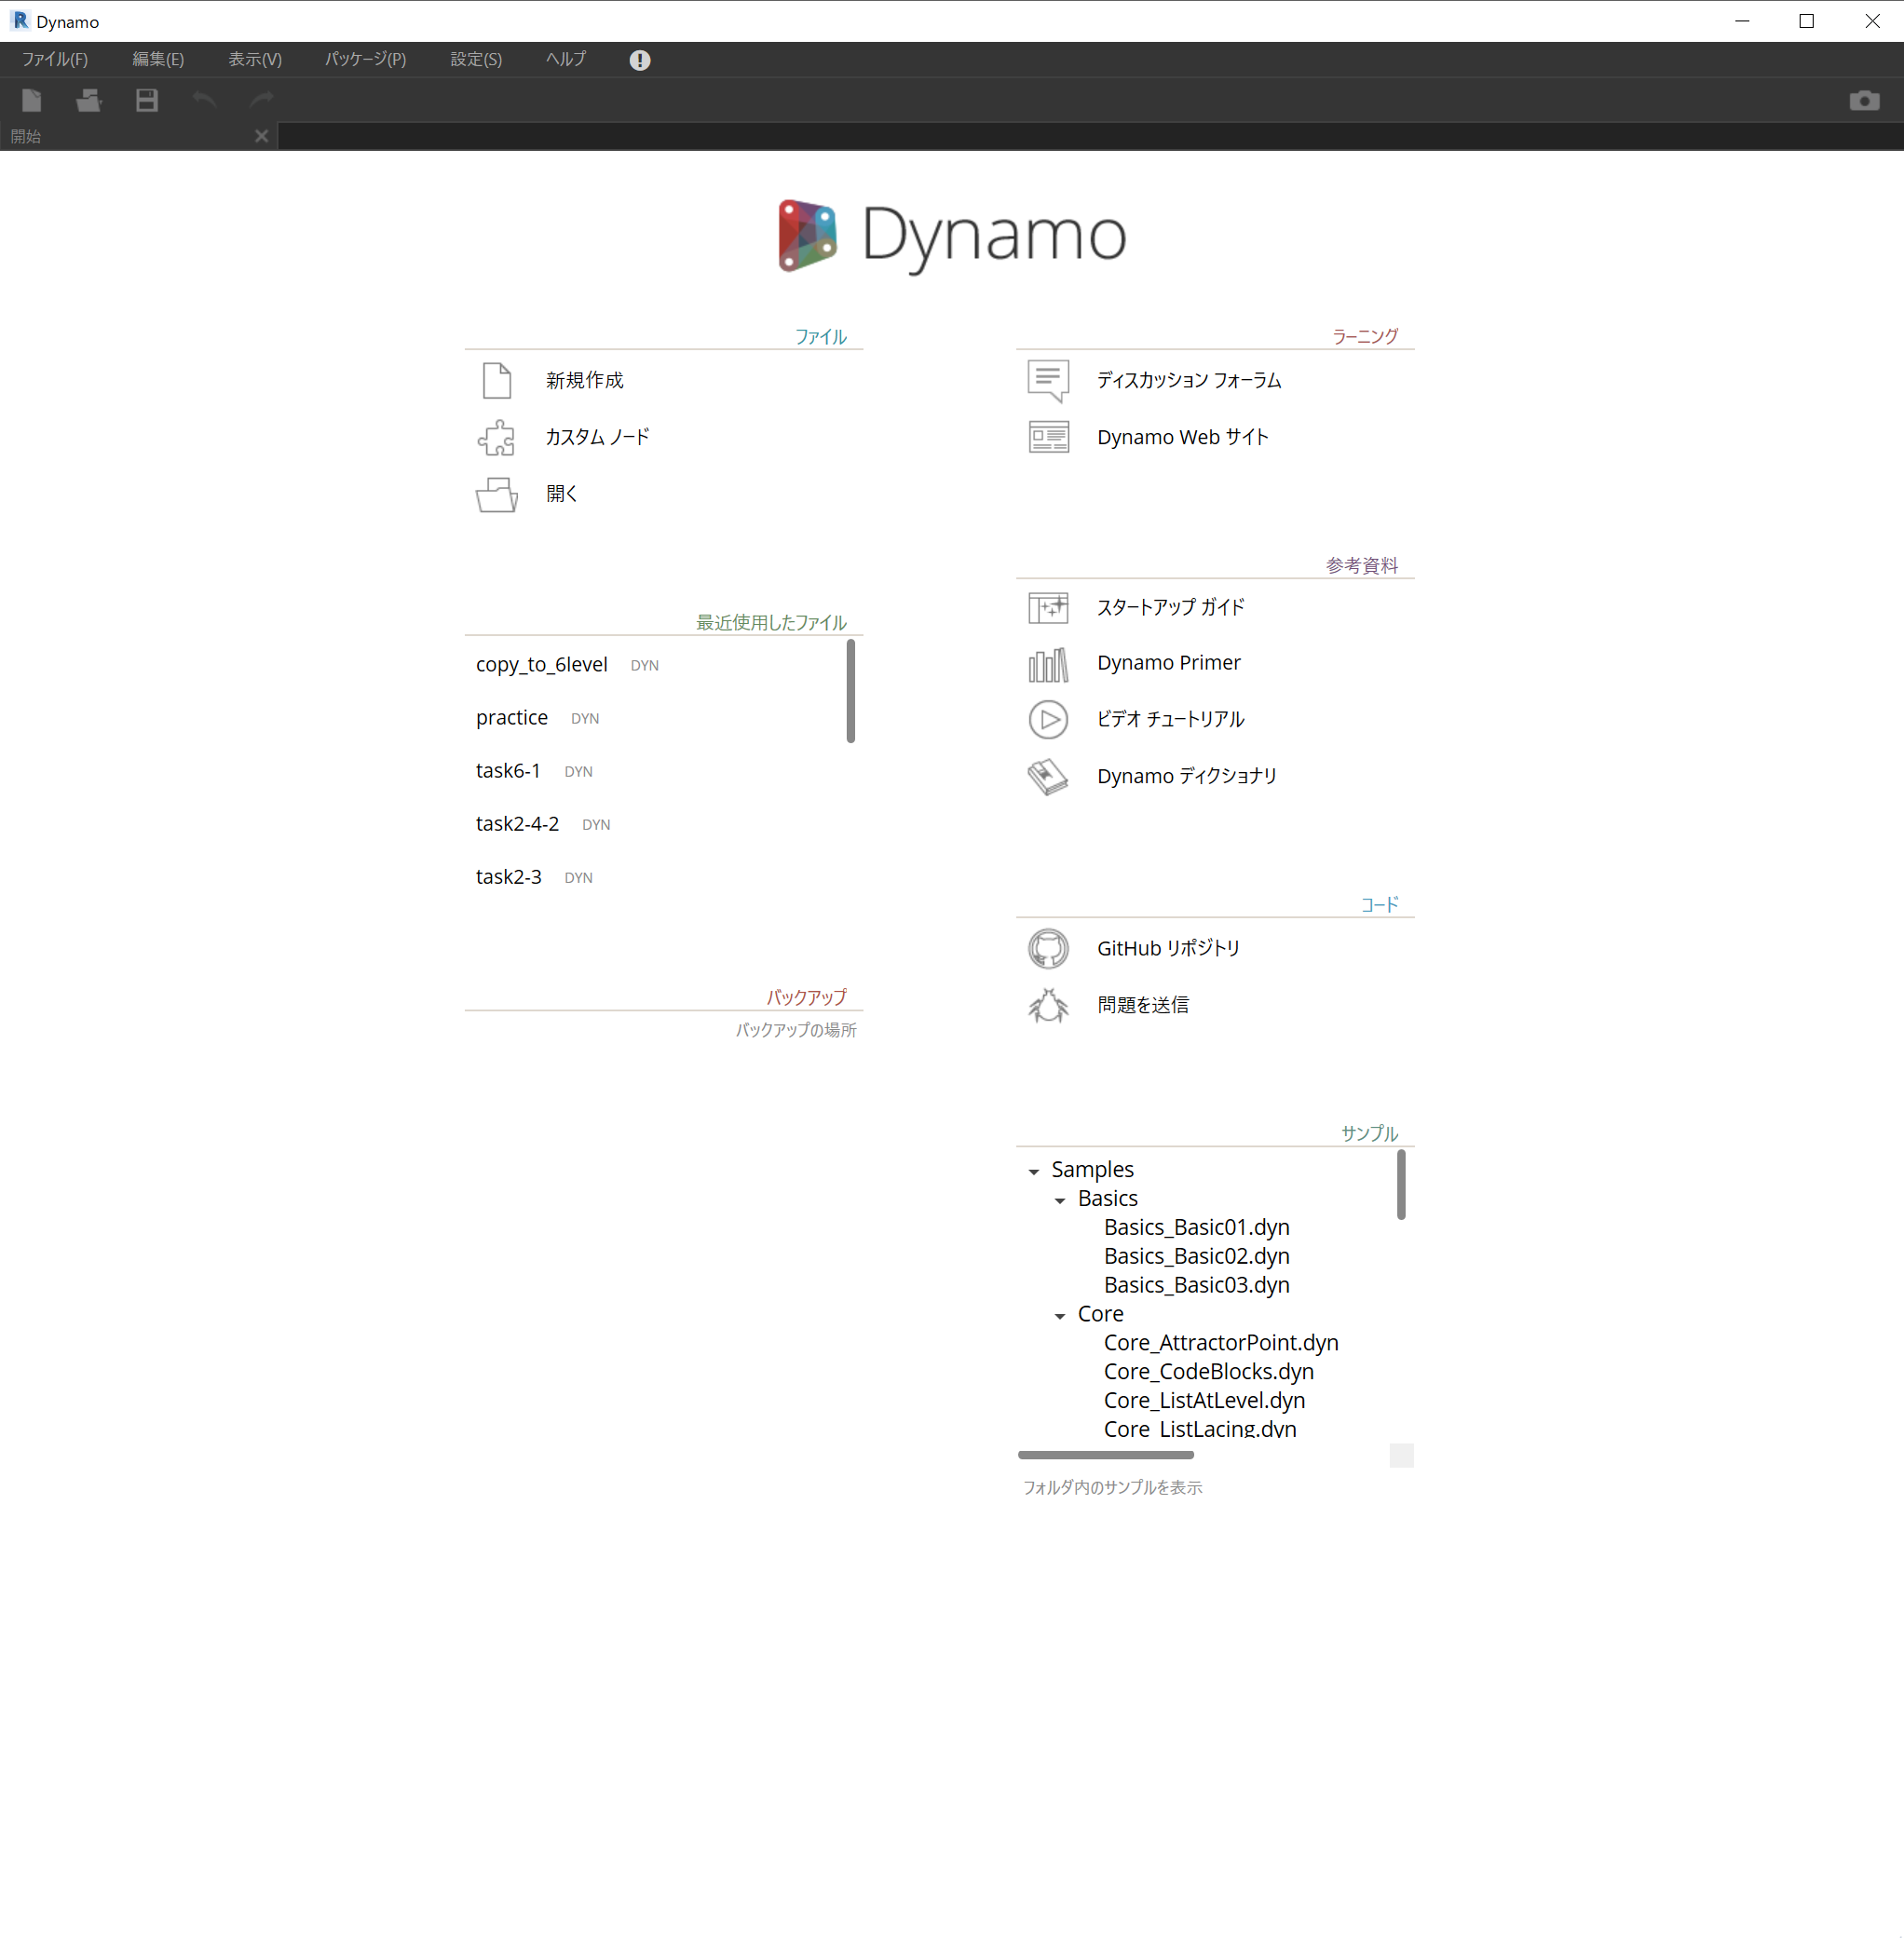 dynamo_open_page.png